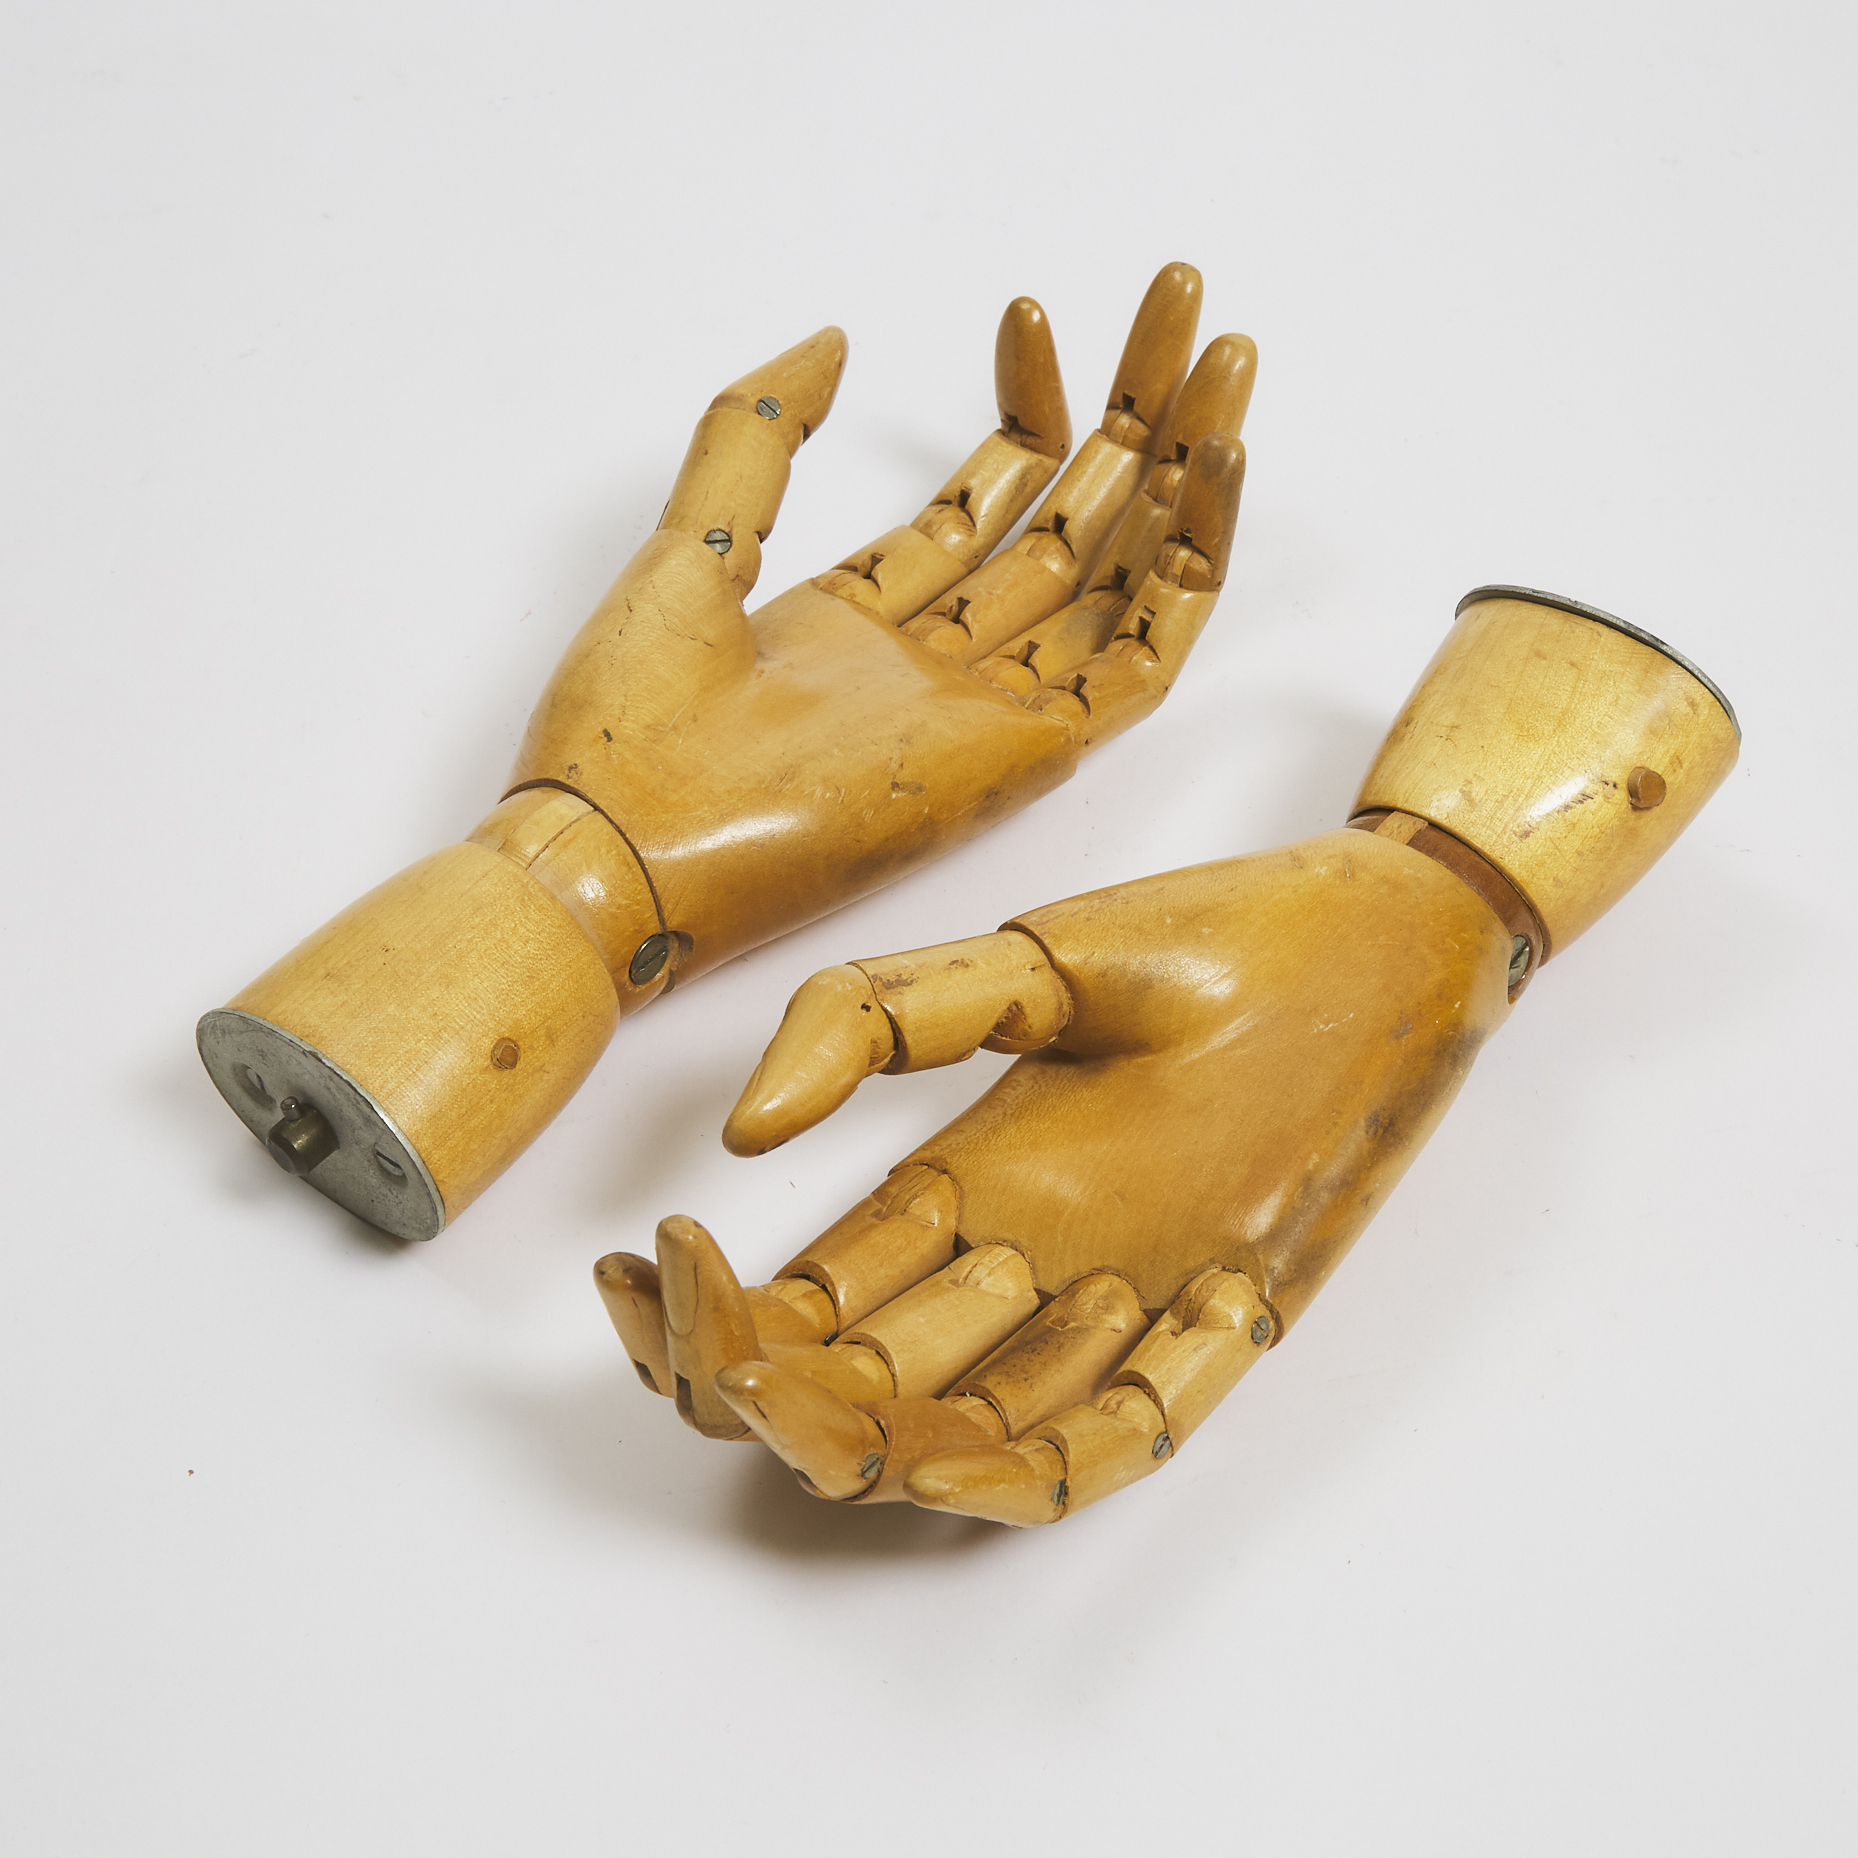 Pair of French Artist's Articulated Wooden Hand Models, early-mid 20th century